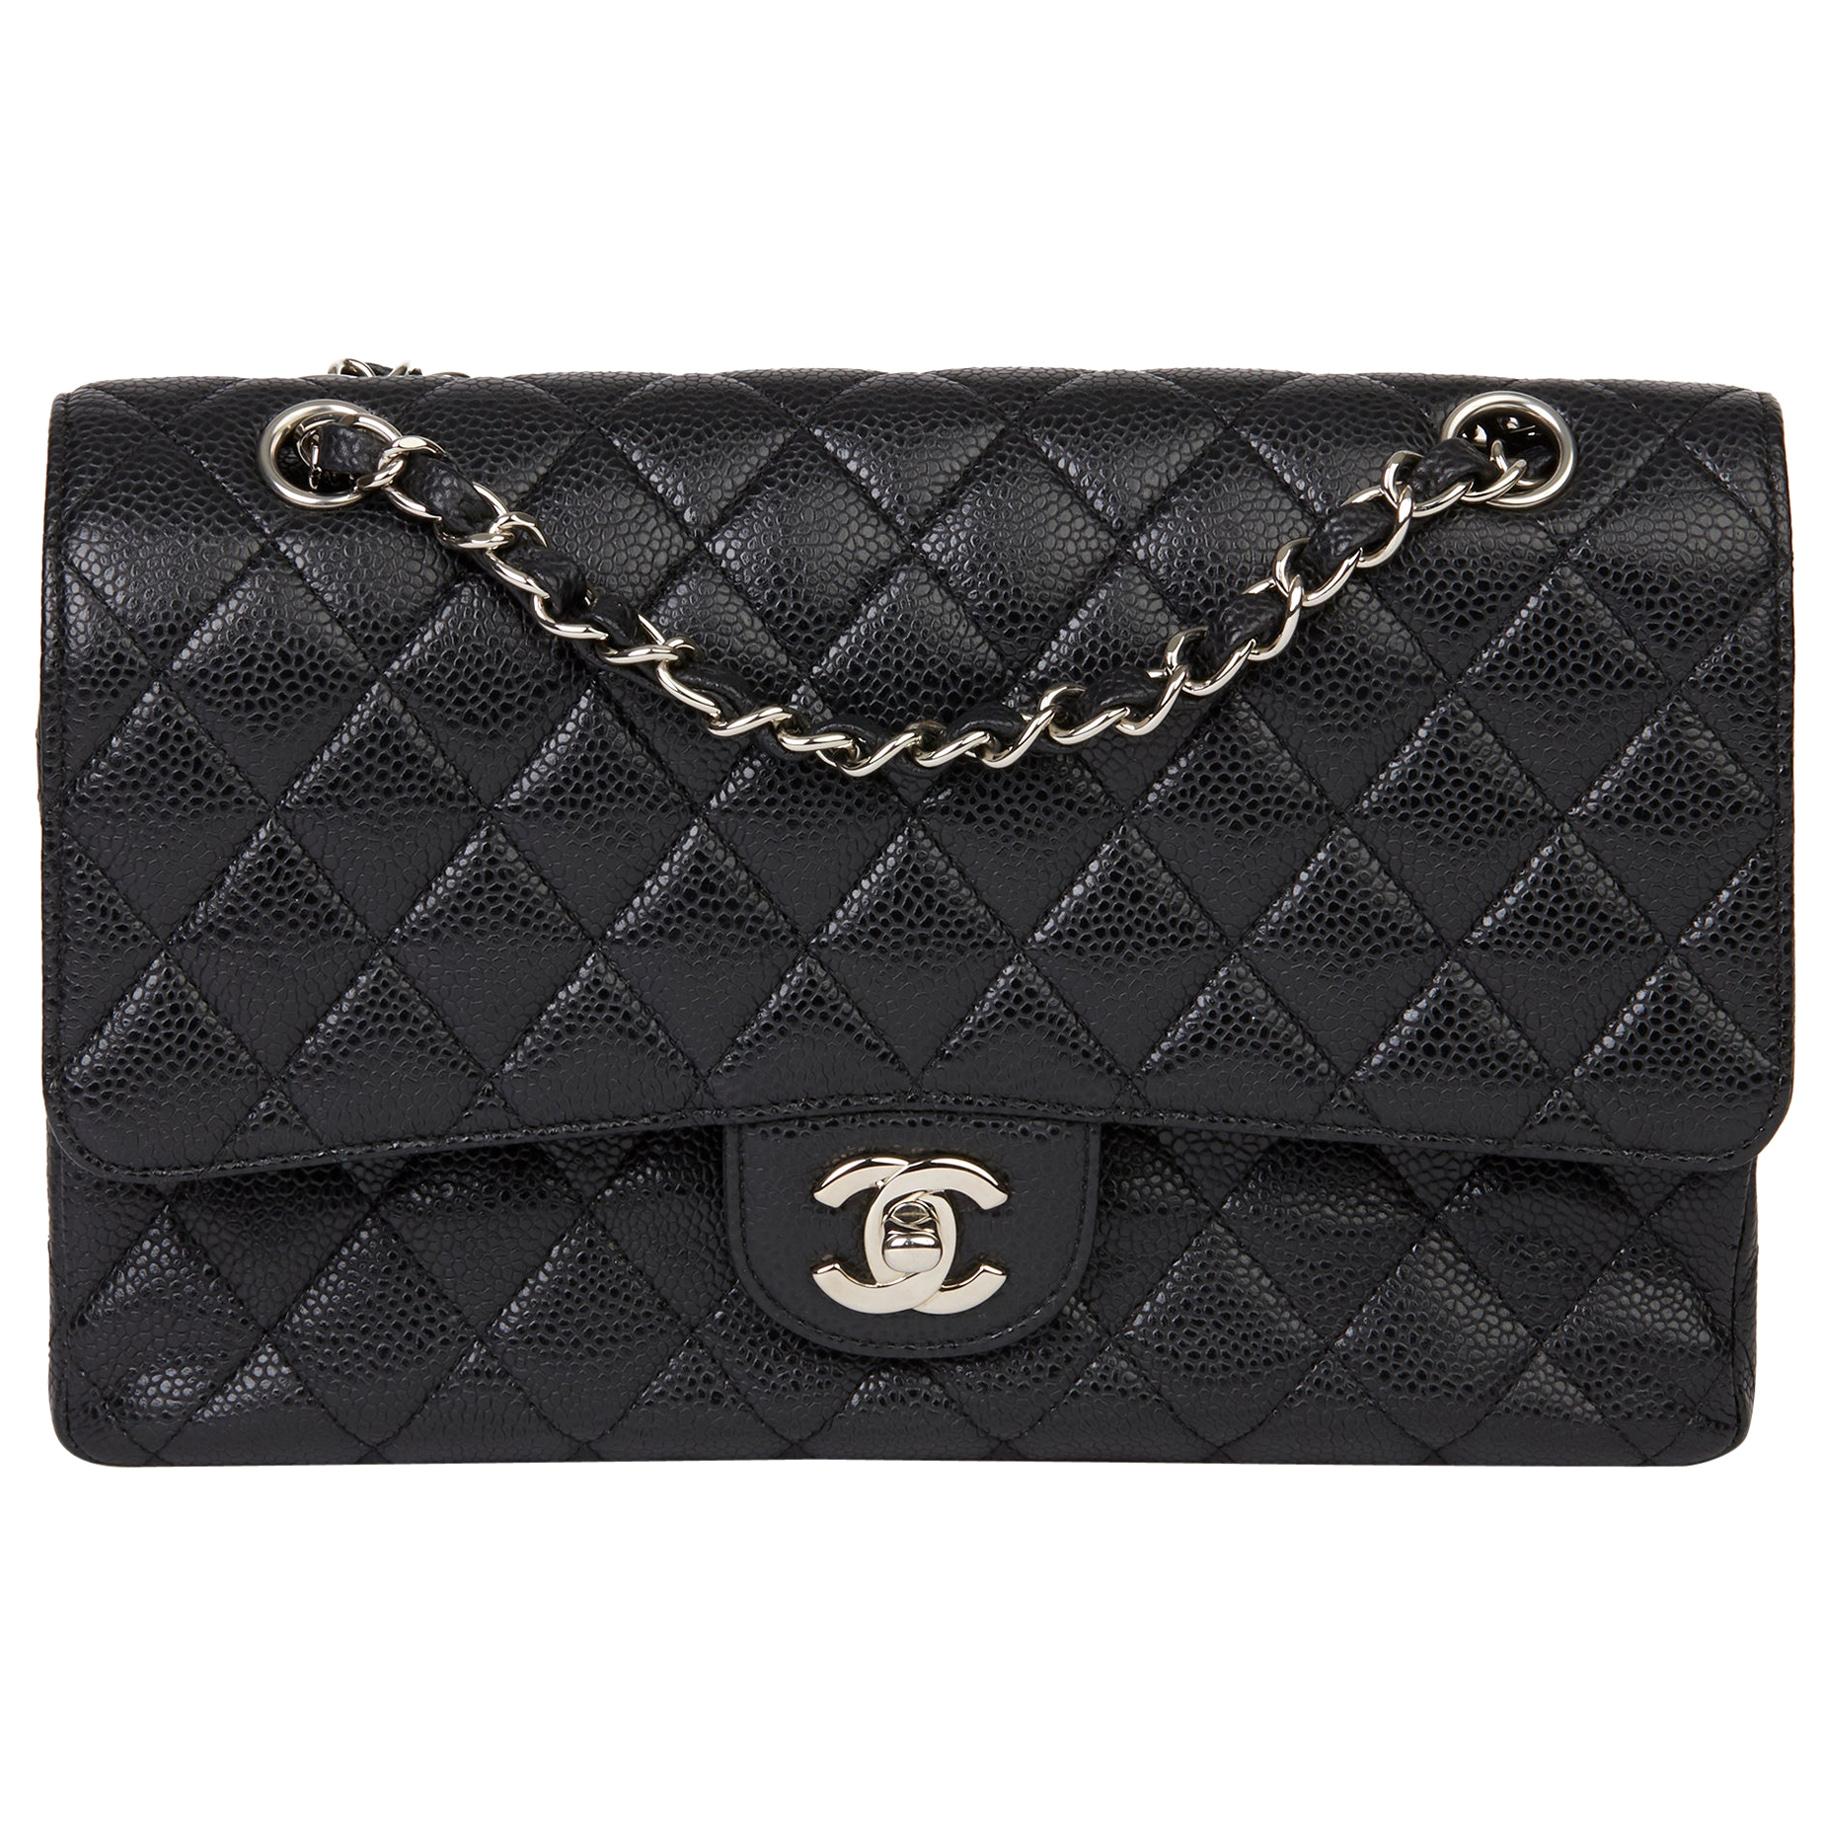 2009 Chanel Black Quilted Caviar Leather Medium Classic Double Flap Bag